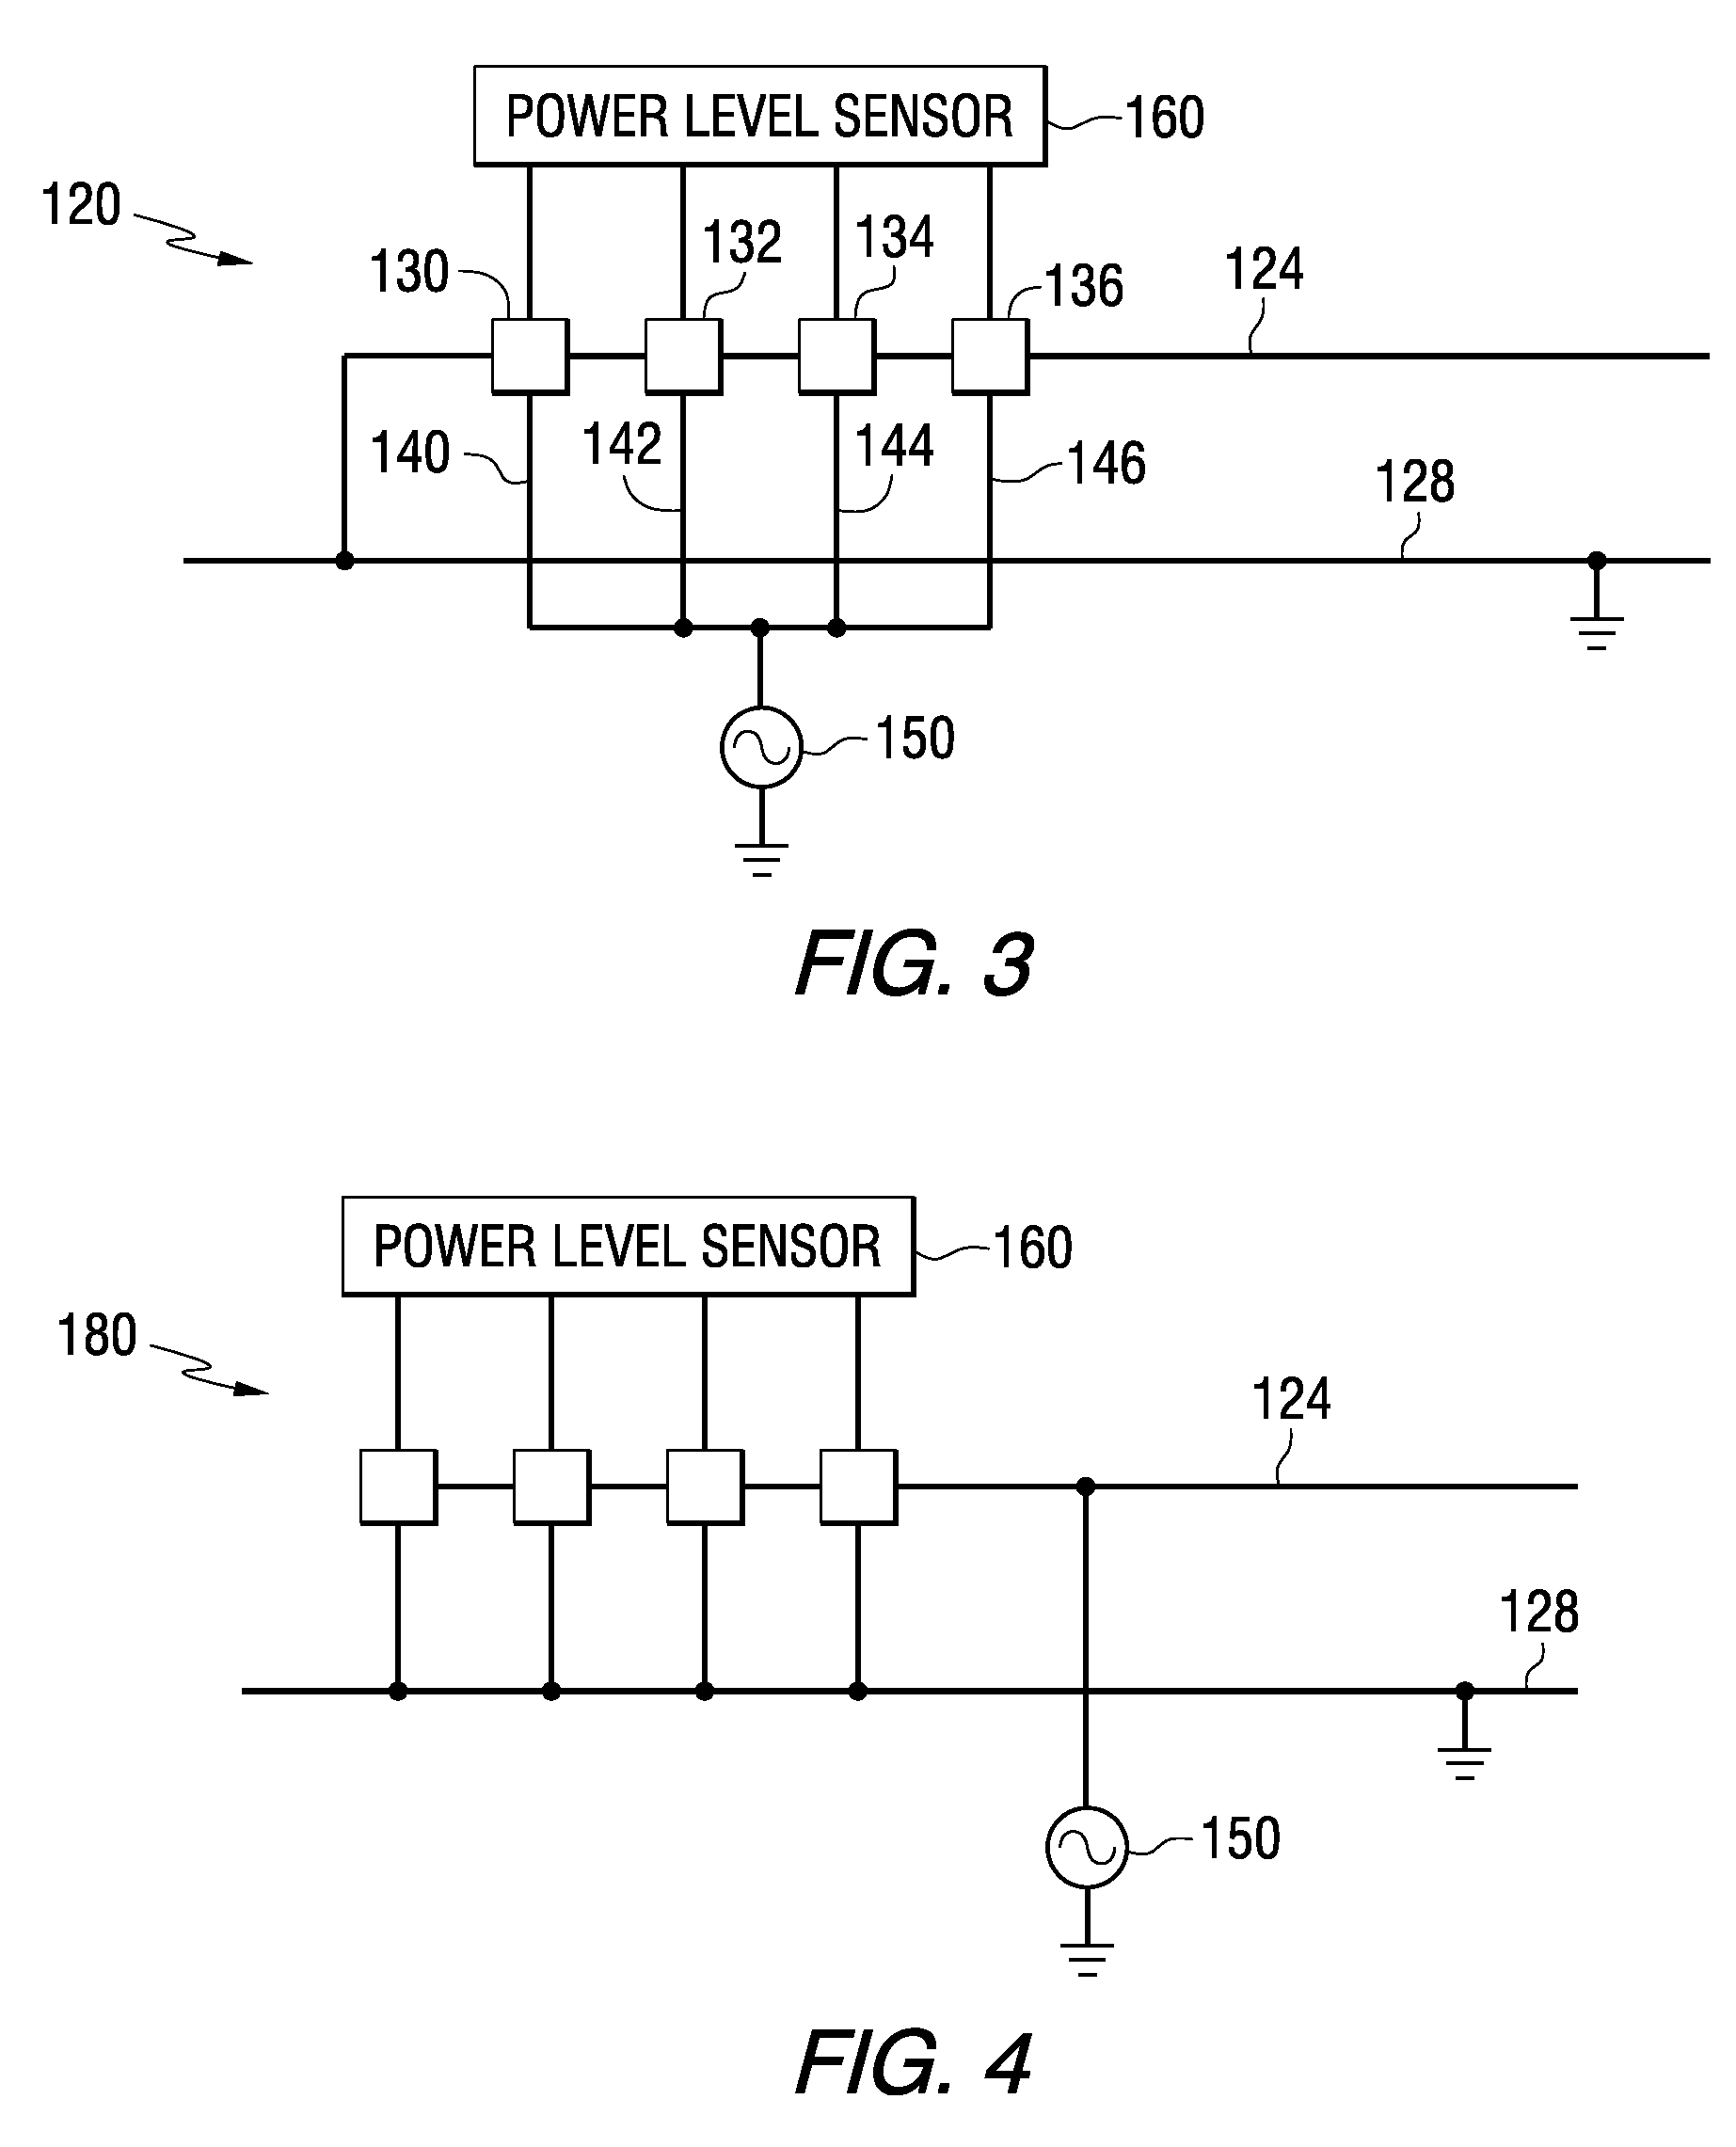 Method and apparatus for adaptively controlling antenna parameters to enhance efficiency and maintain antenna size compactness